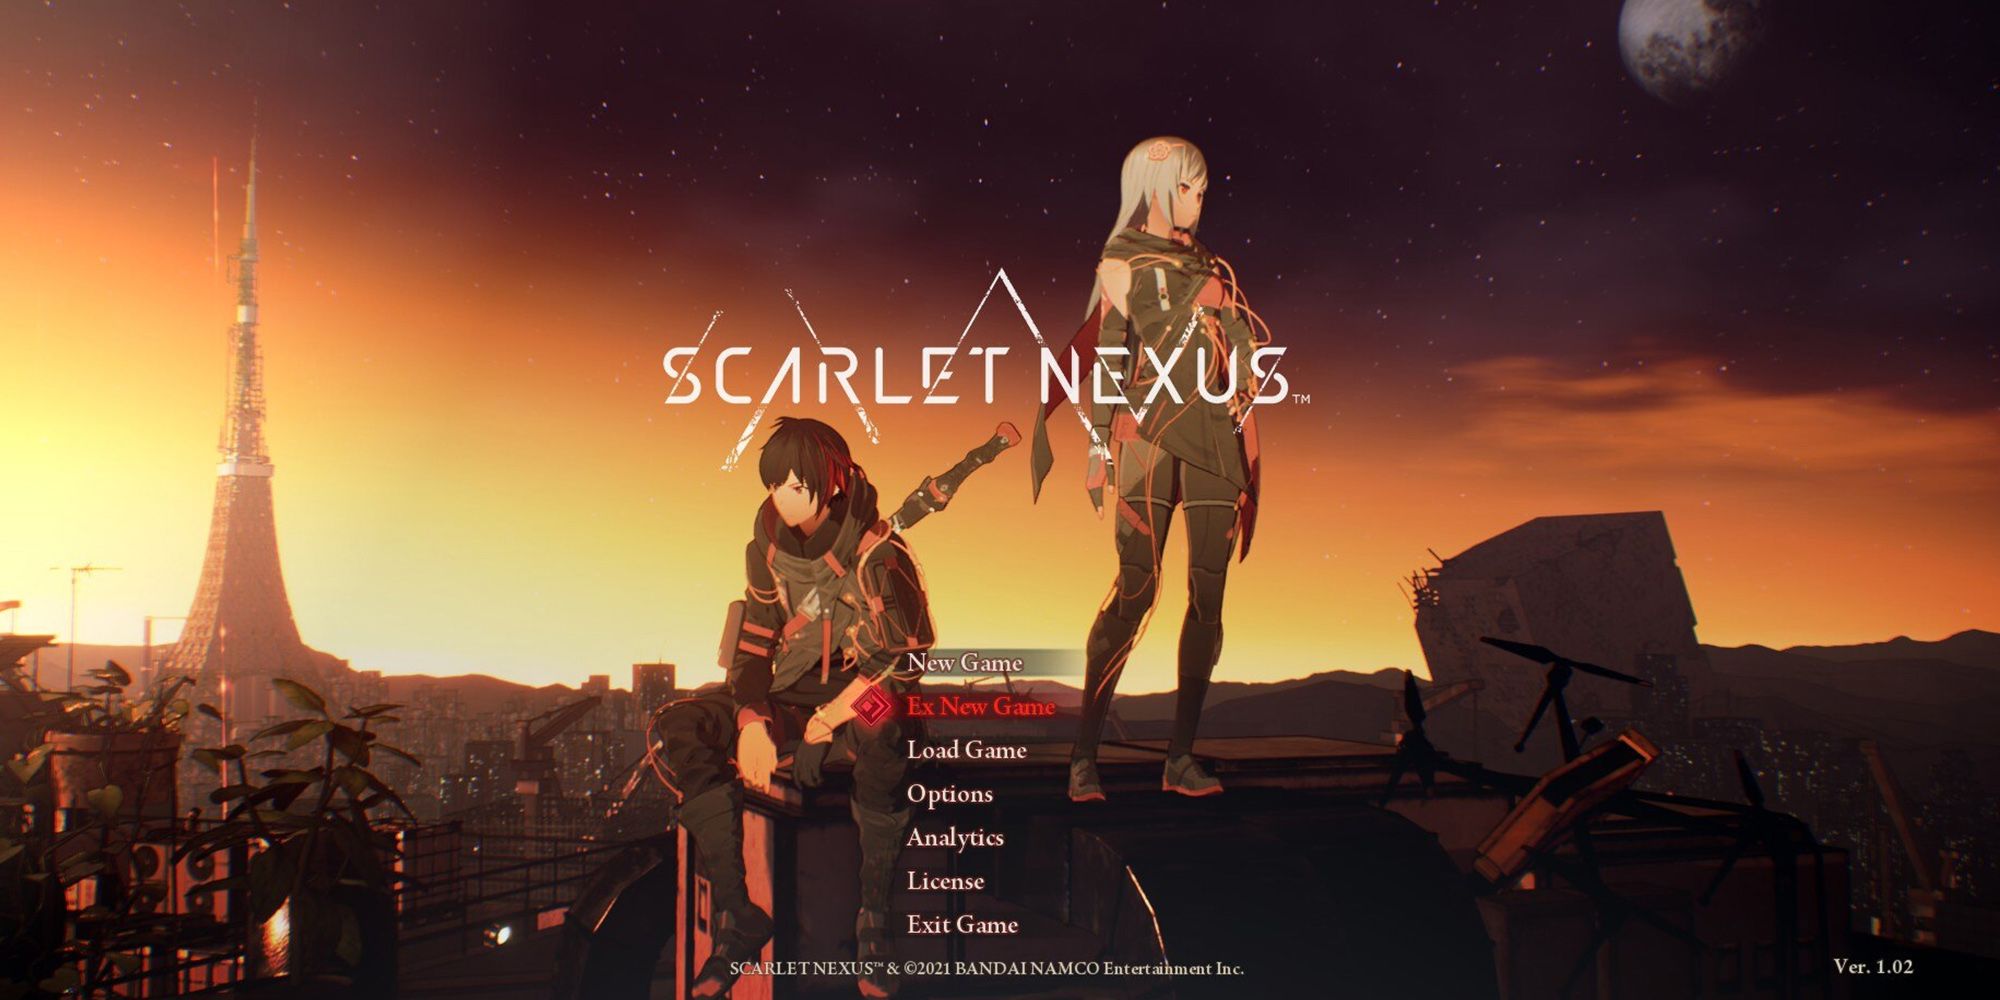 Scarlet Nexus - The Main Menu With The EX New Game Option